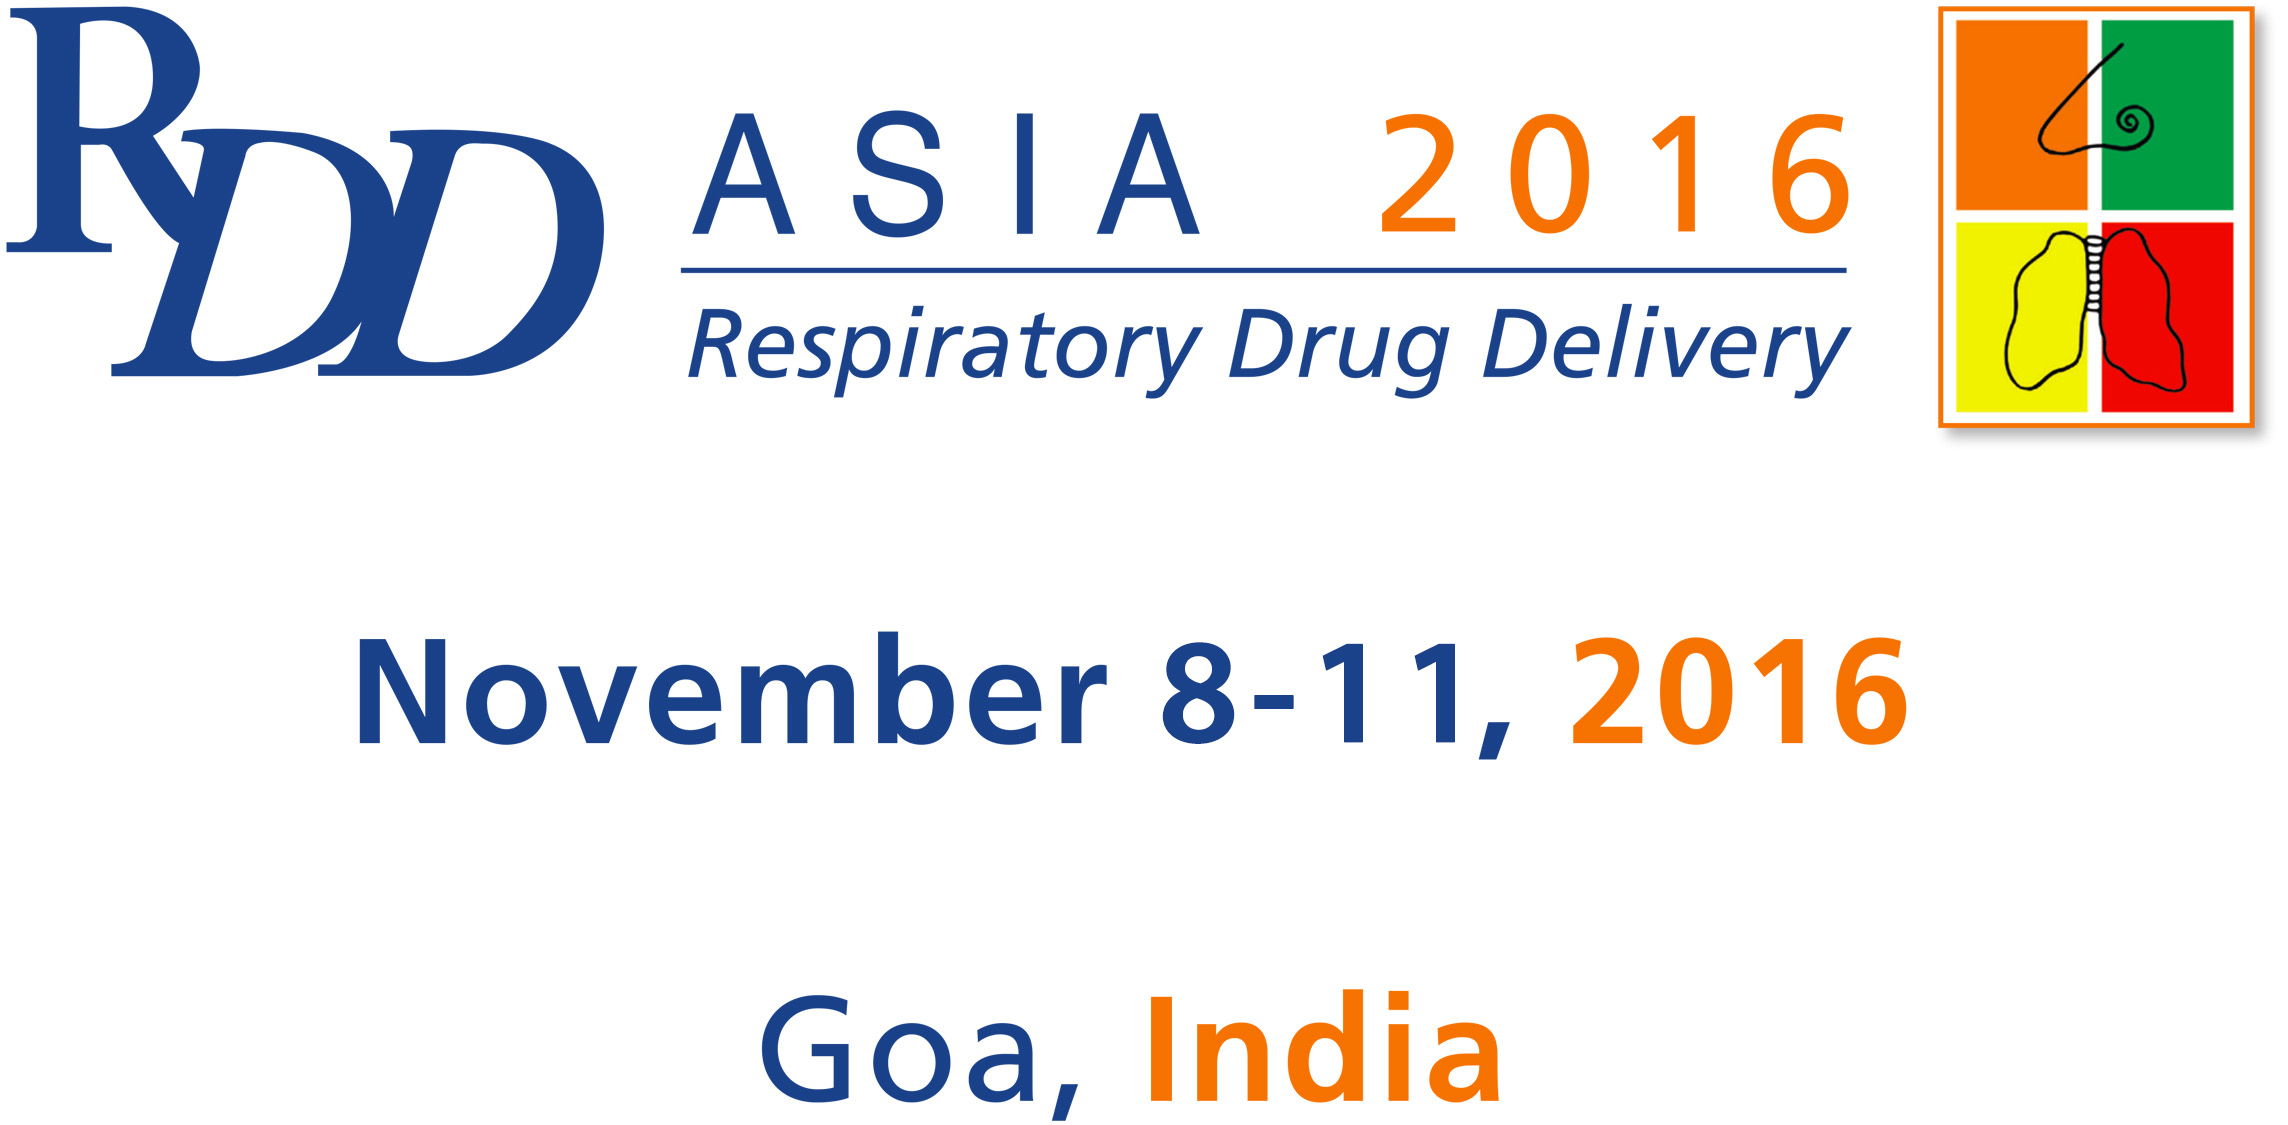 Aptar Pharma and RDD Online co-organize the second edition of RDD Asia, in Goa, India